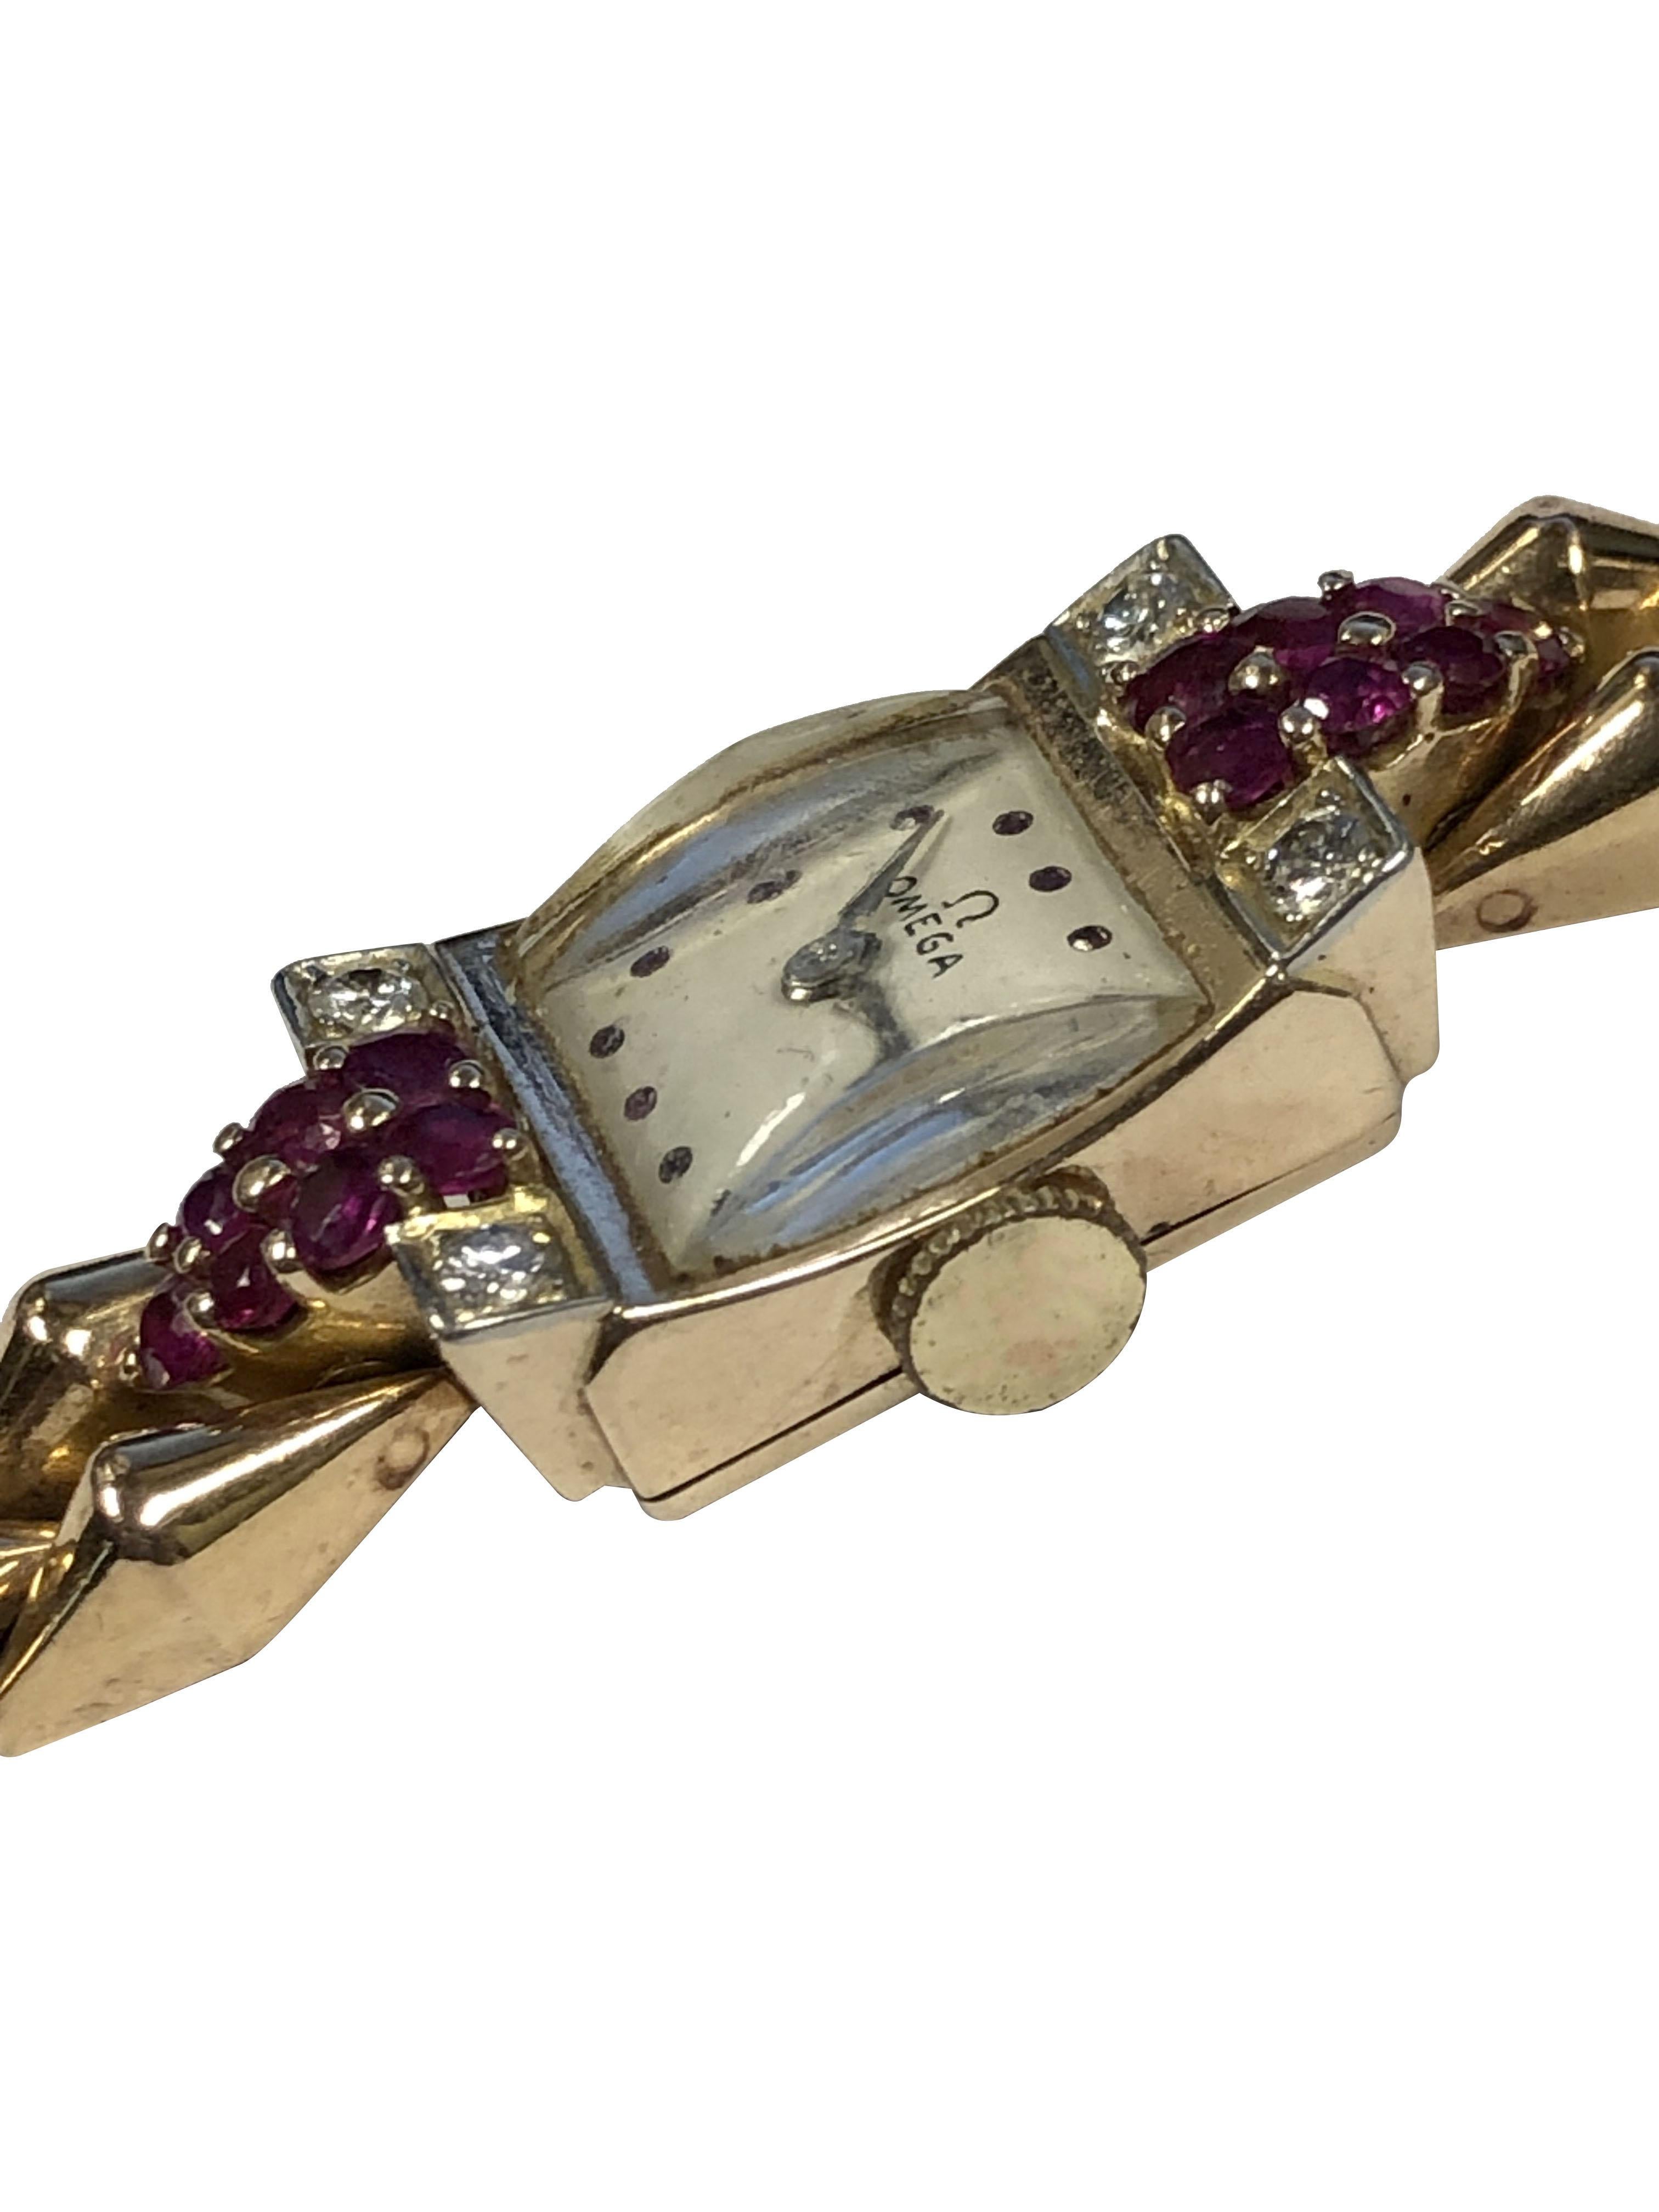 Circa 1940s Omega Ladies Bracelet Watch, 22 x 14 M.M. 14k Rose Gold Signed Omega 2 piece case, the case top is set with Fine color Rubies and Round Brilliant cut Diamonds. 17 Jewel Mechanical, Manual wind movement, White Dial with Ruby set markers.